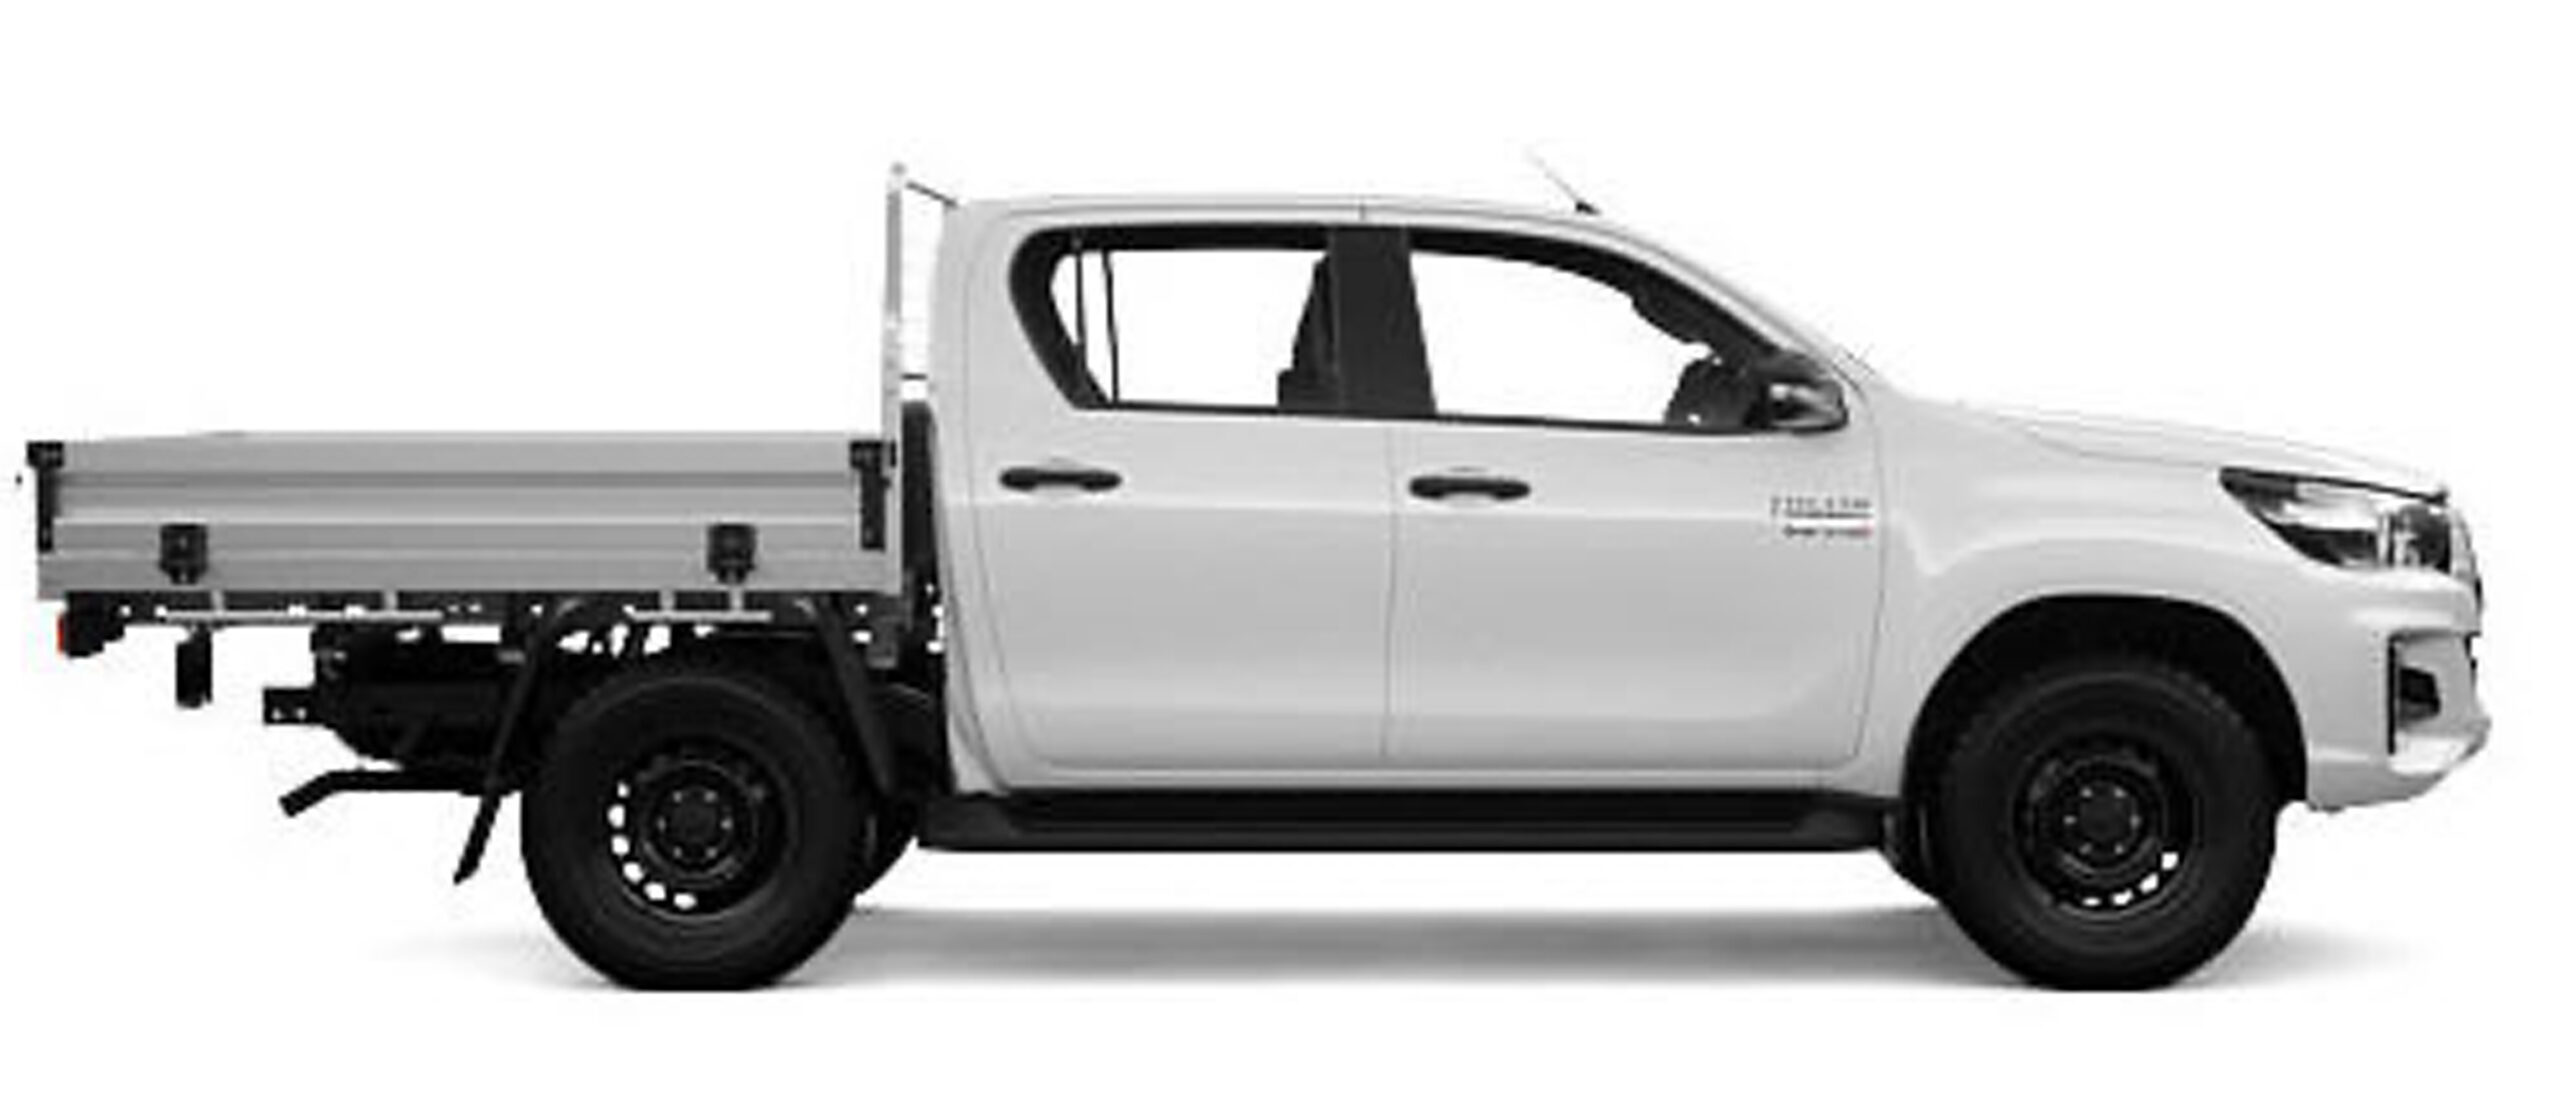 New Toyota Hilux Dual Cab Tray Premium Fleet And Vehicle Solutions